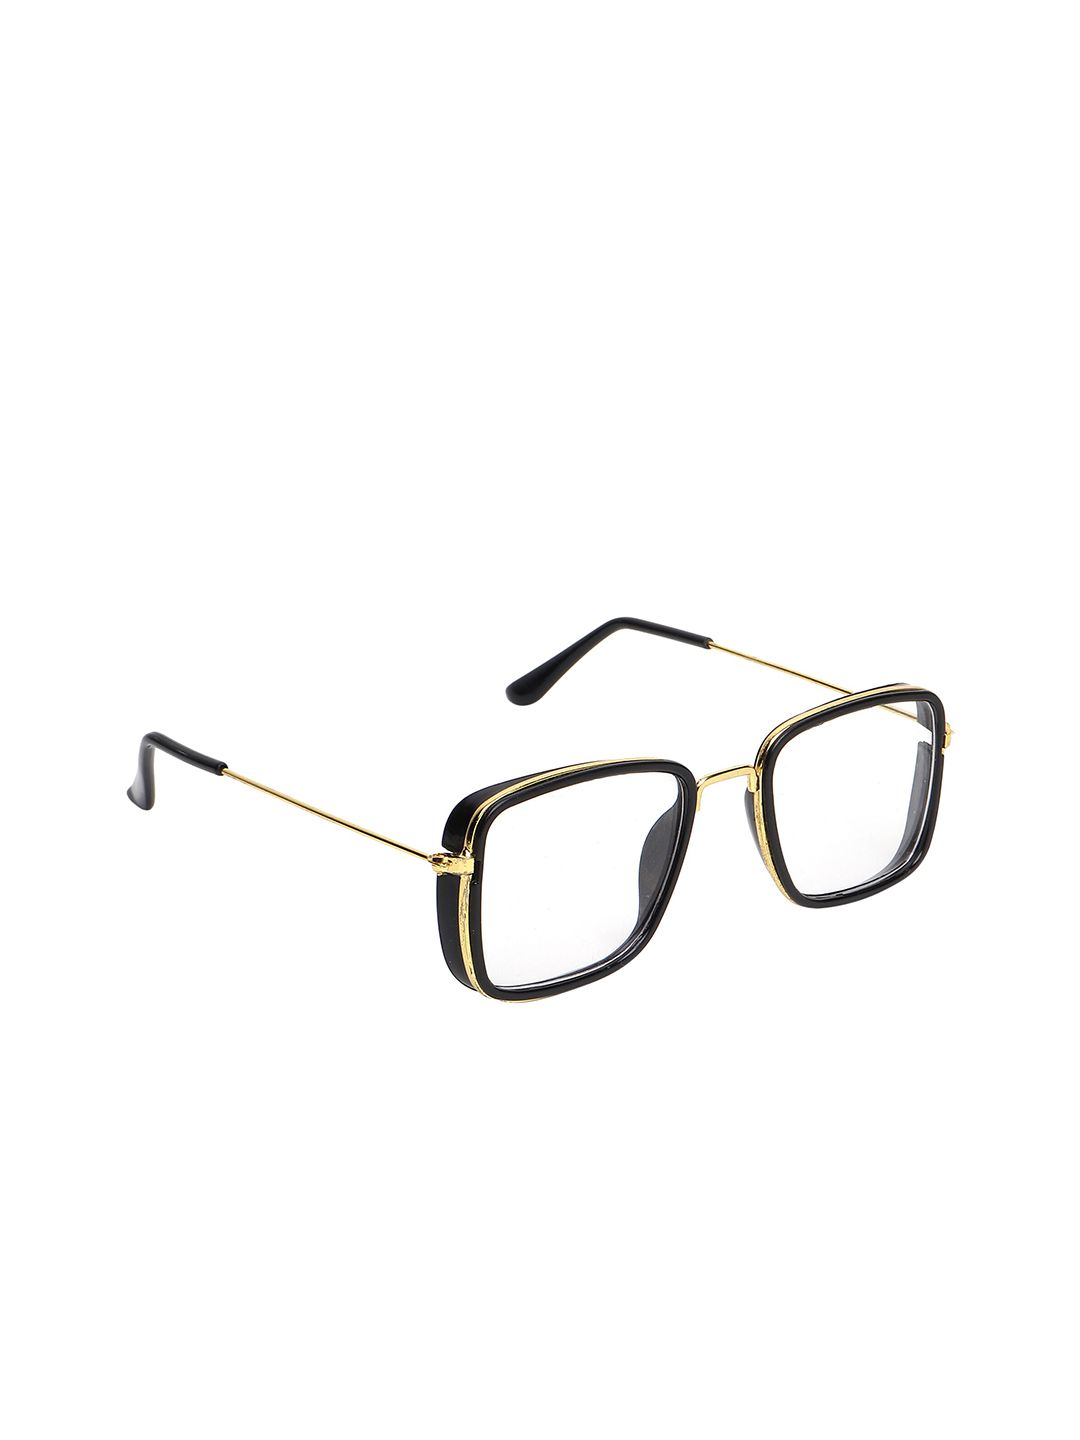 ALIGATORR Unisex Clear Lens & Gold-Toned Square Sunglasses with UV Protected Lens Price in India